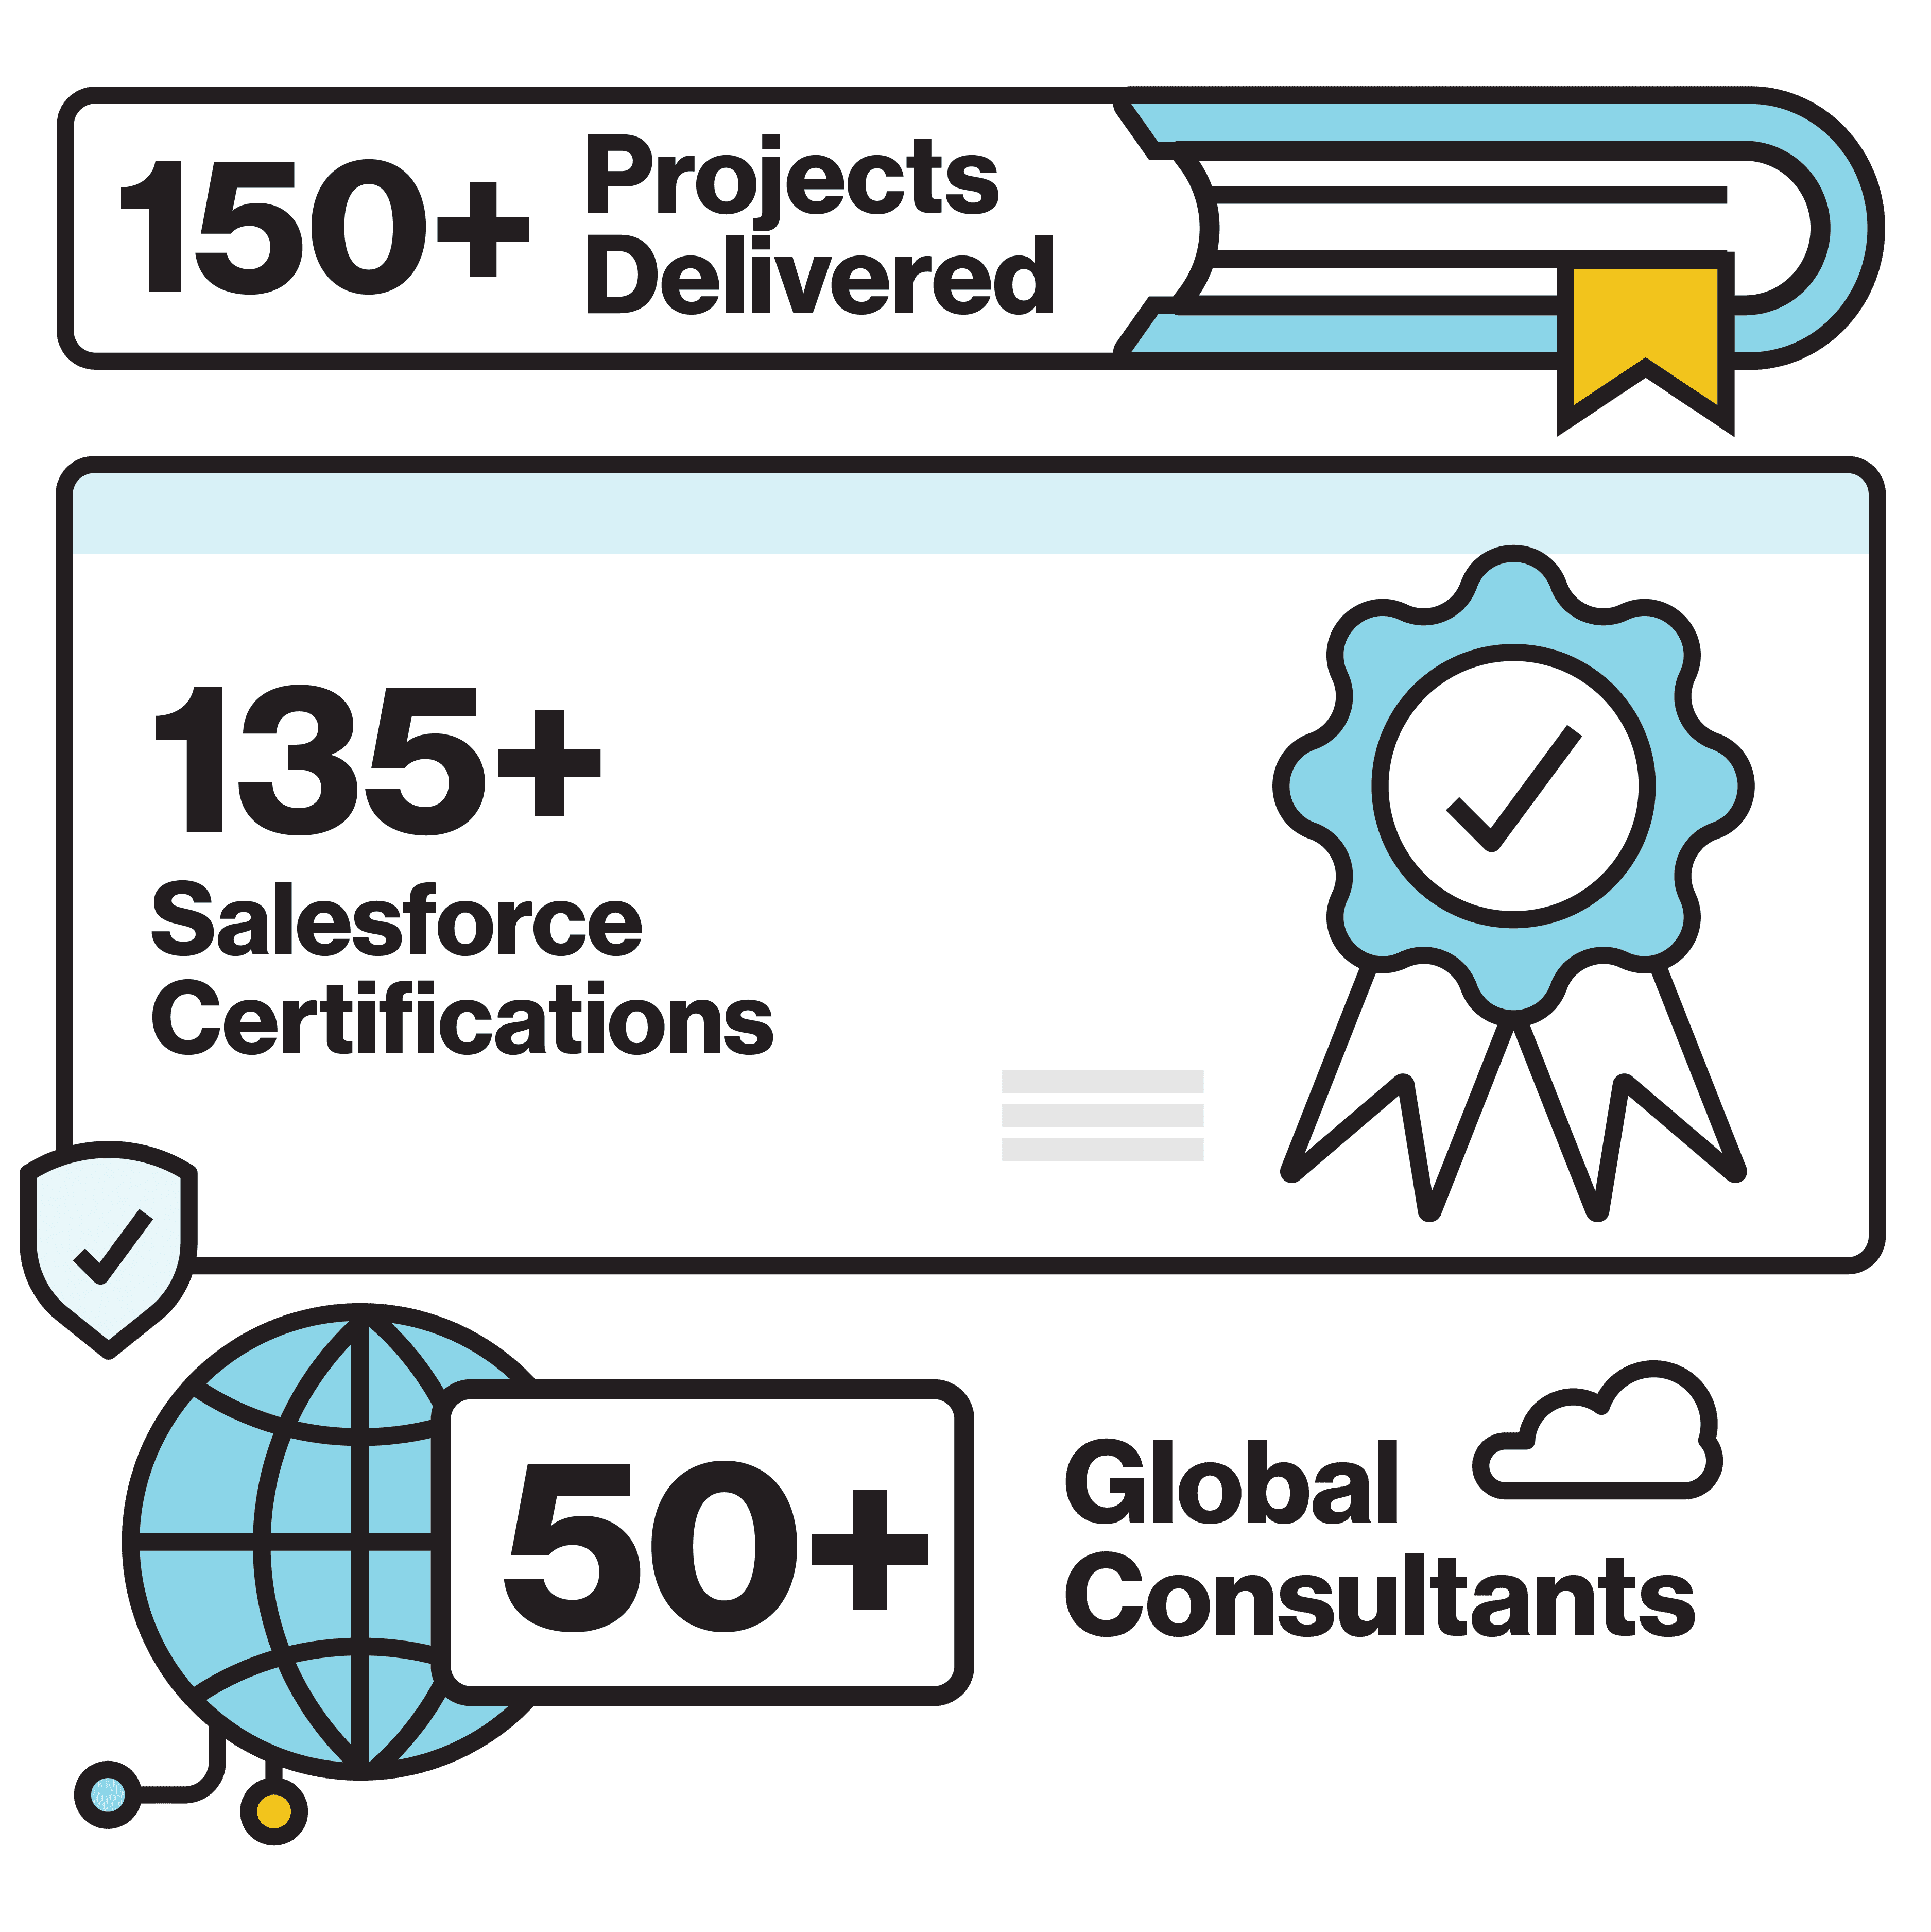 150+ Projects Delivered. 130+ Salesforce Certifications, 50+ Global Consultants